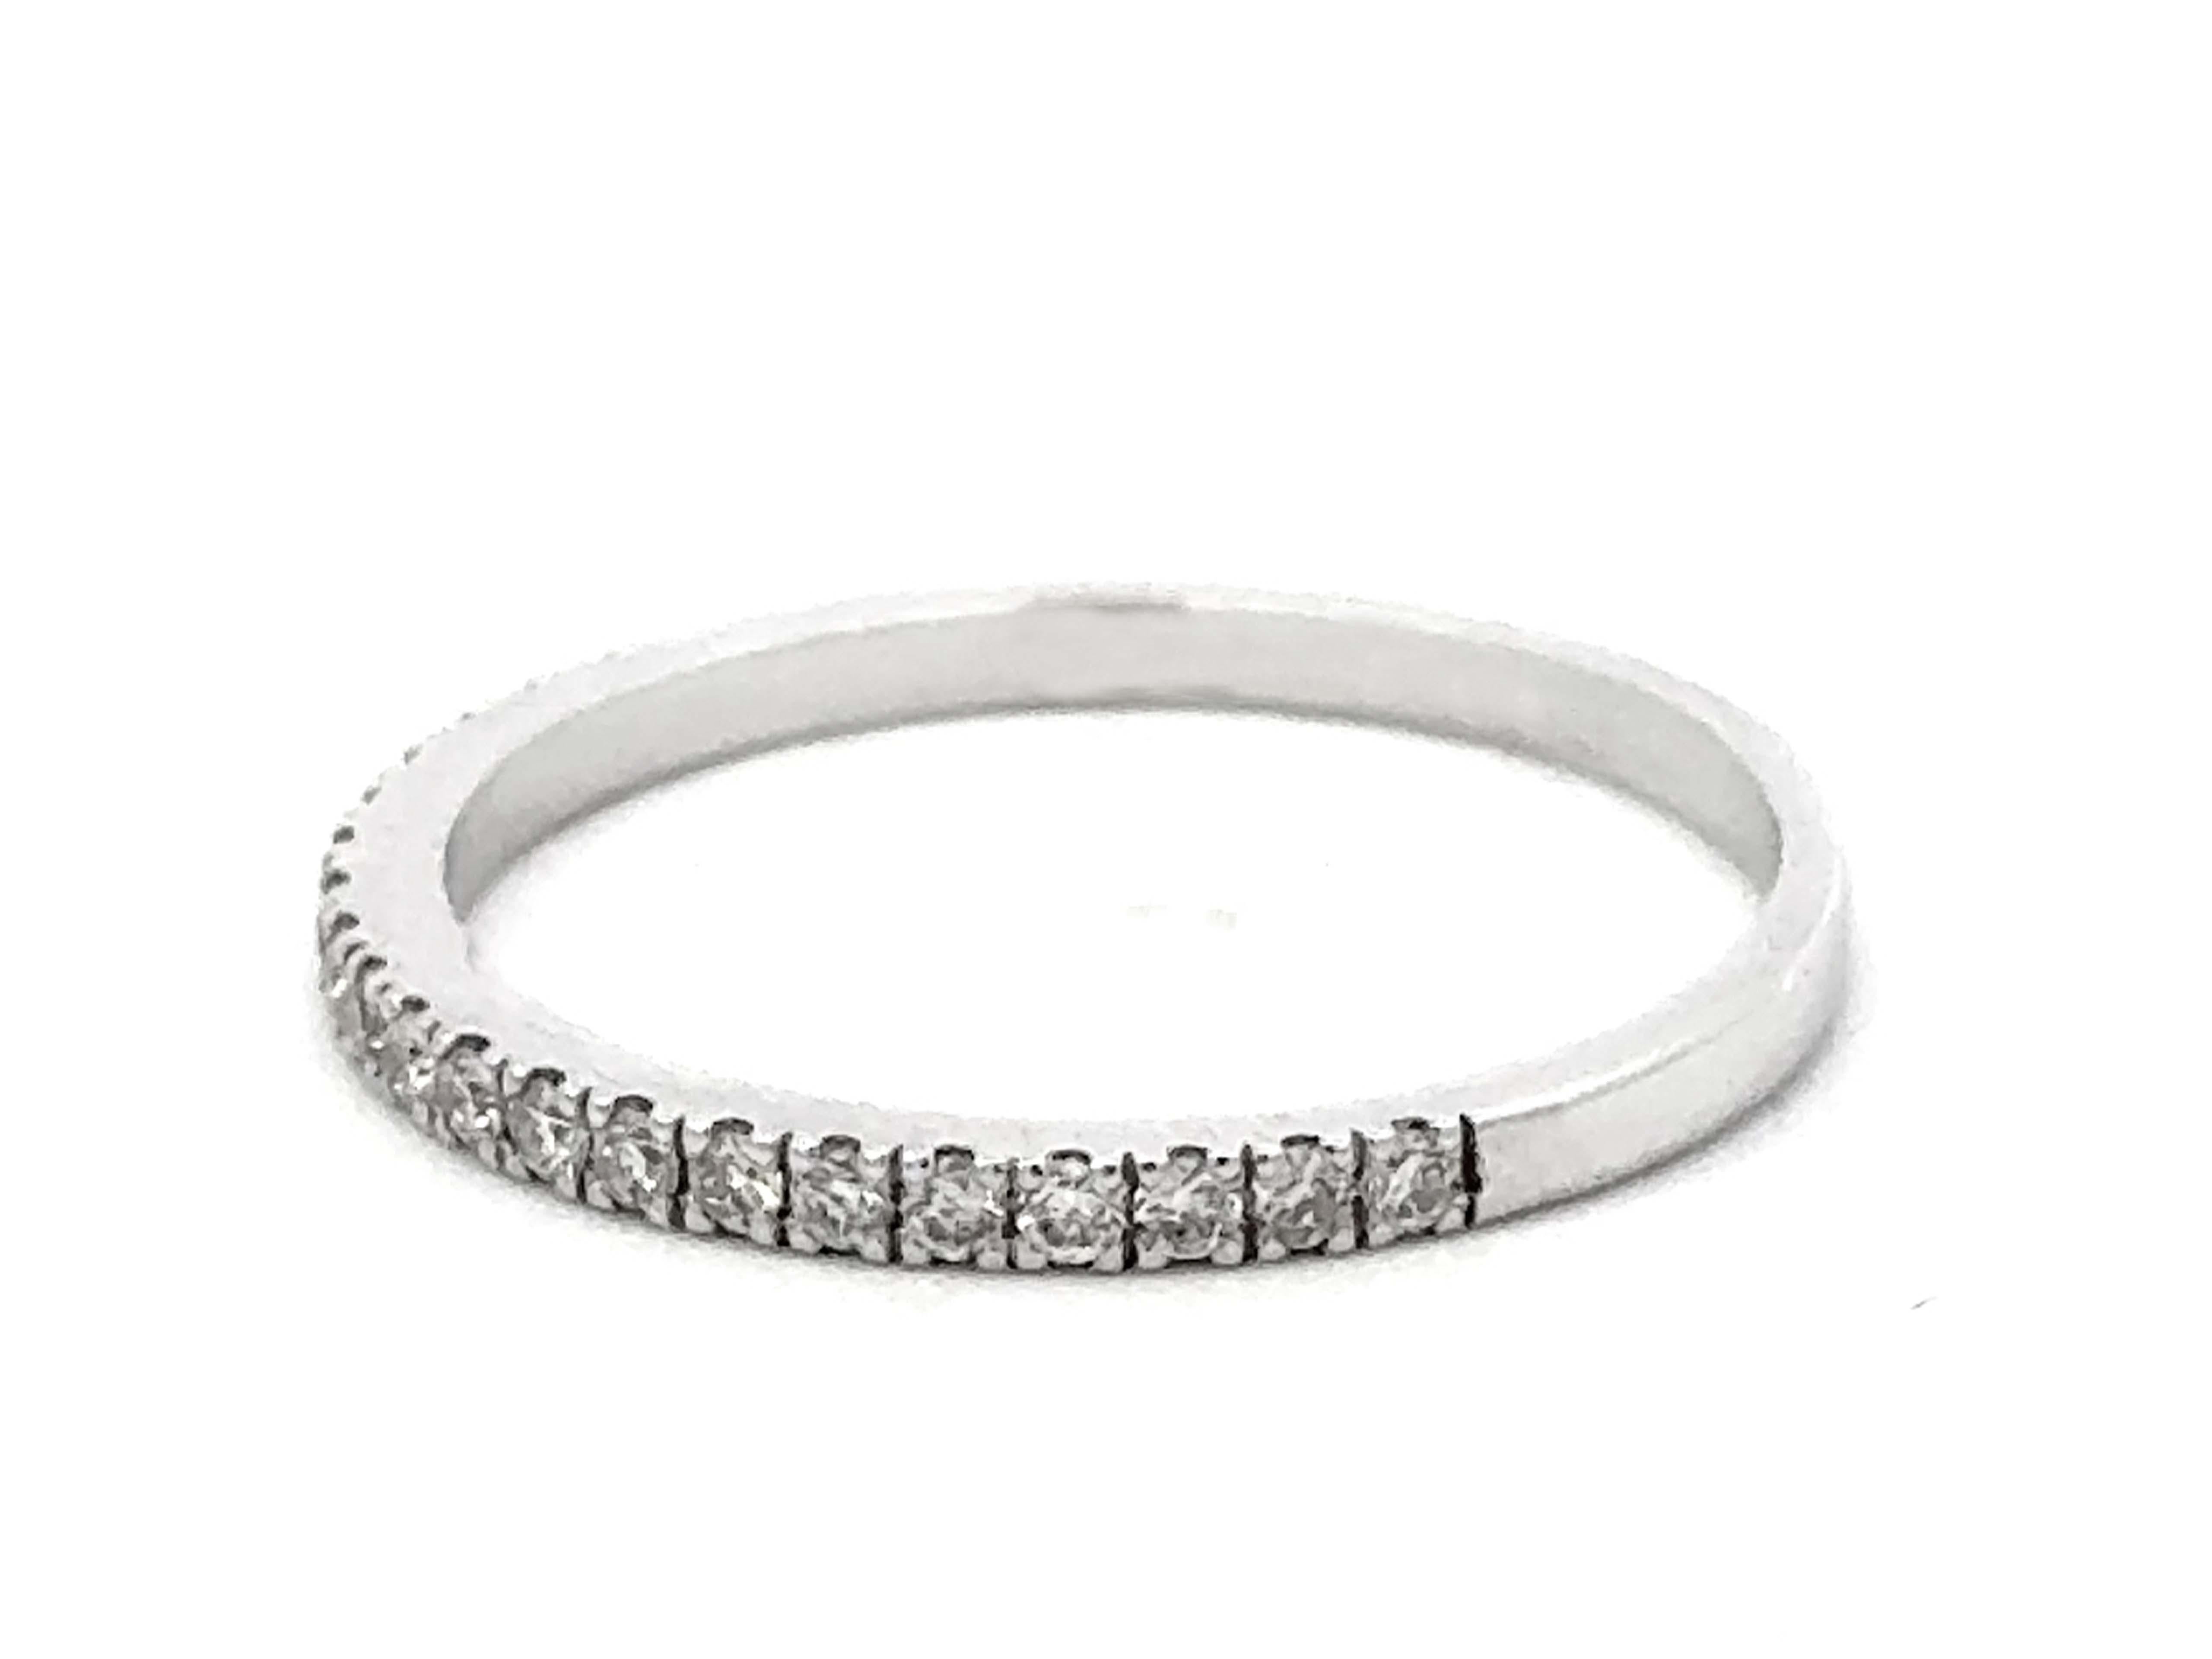 Prong Set Brilliant Cut Diamond Thin Band Ring 14k White Gold In Excellent Condition For Sale In Honolulu, HI